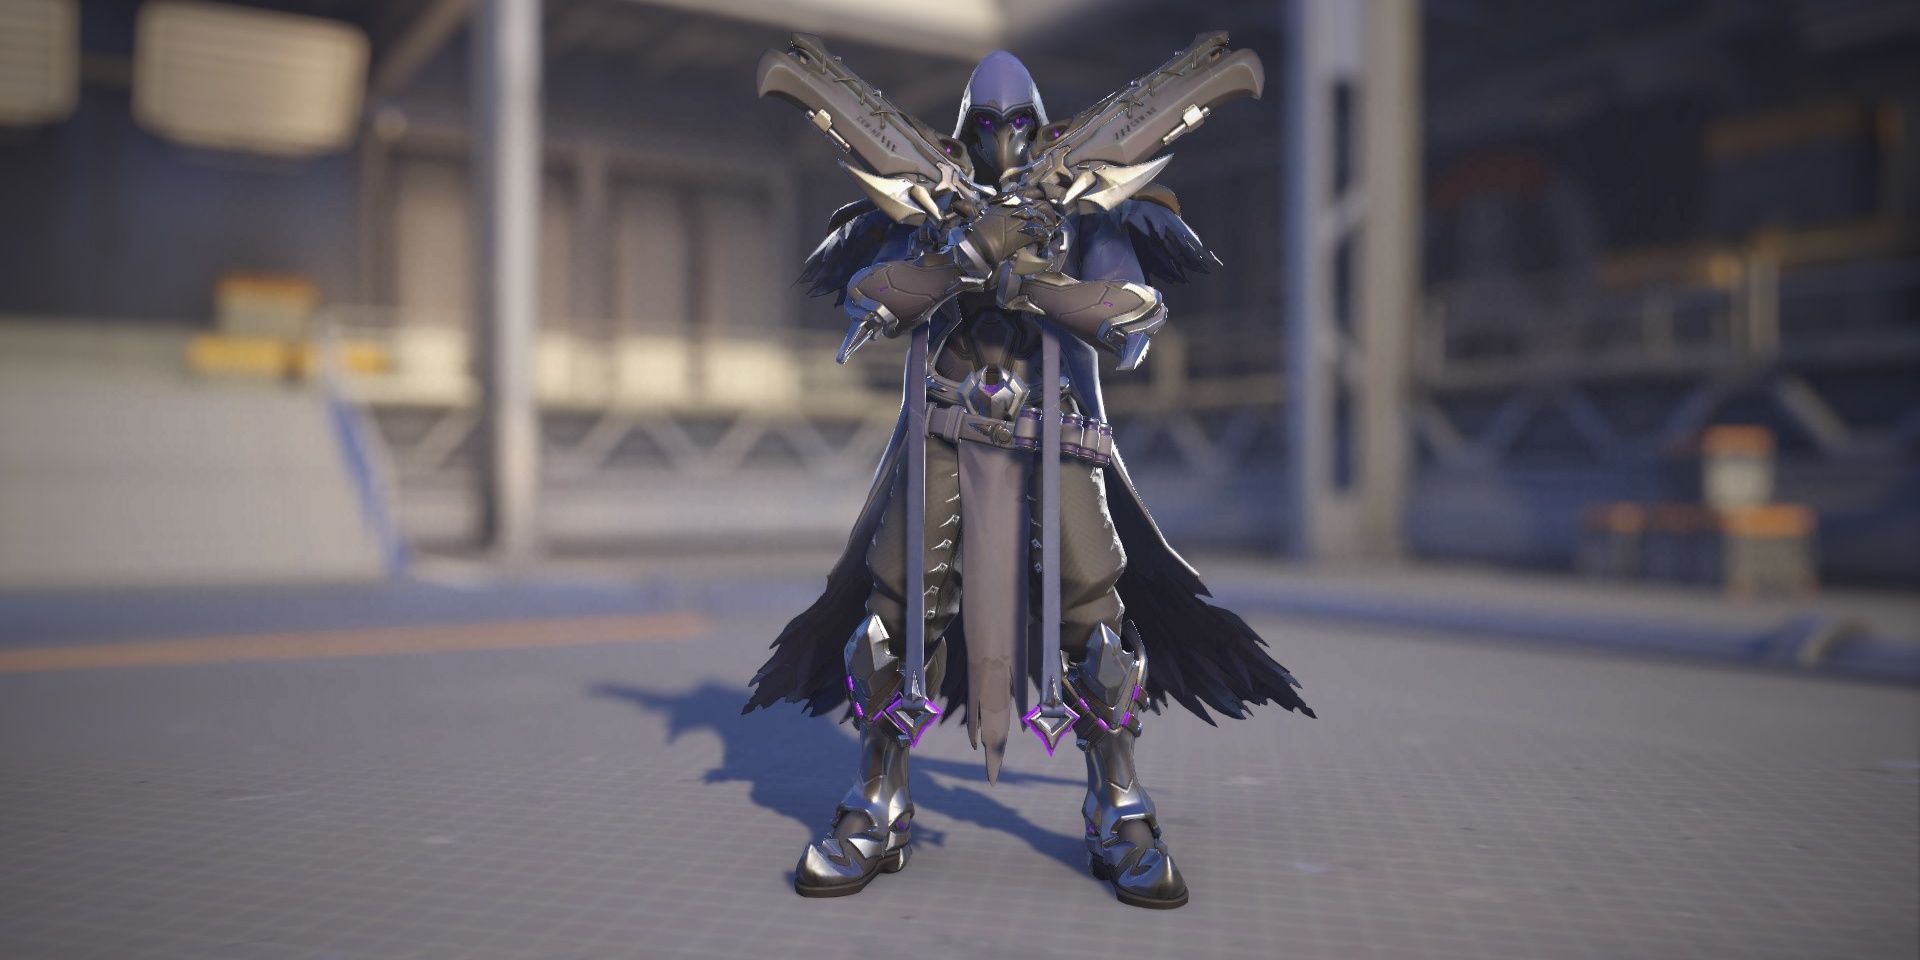 Reaper Nevermore skin, based on The Raven by Edgar Allen Poe, in Overwatch 2